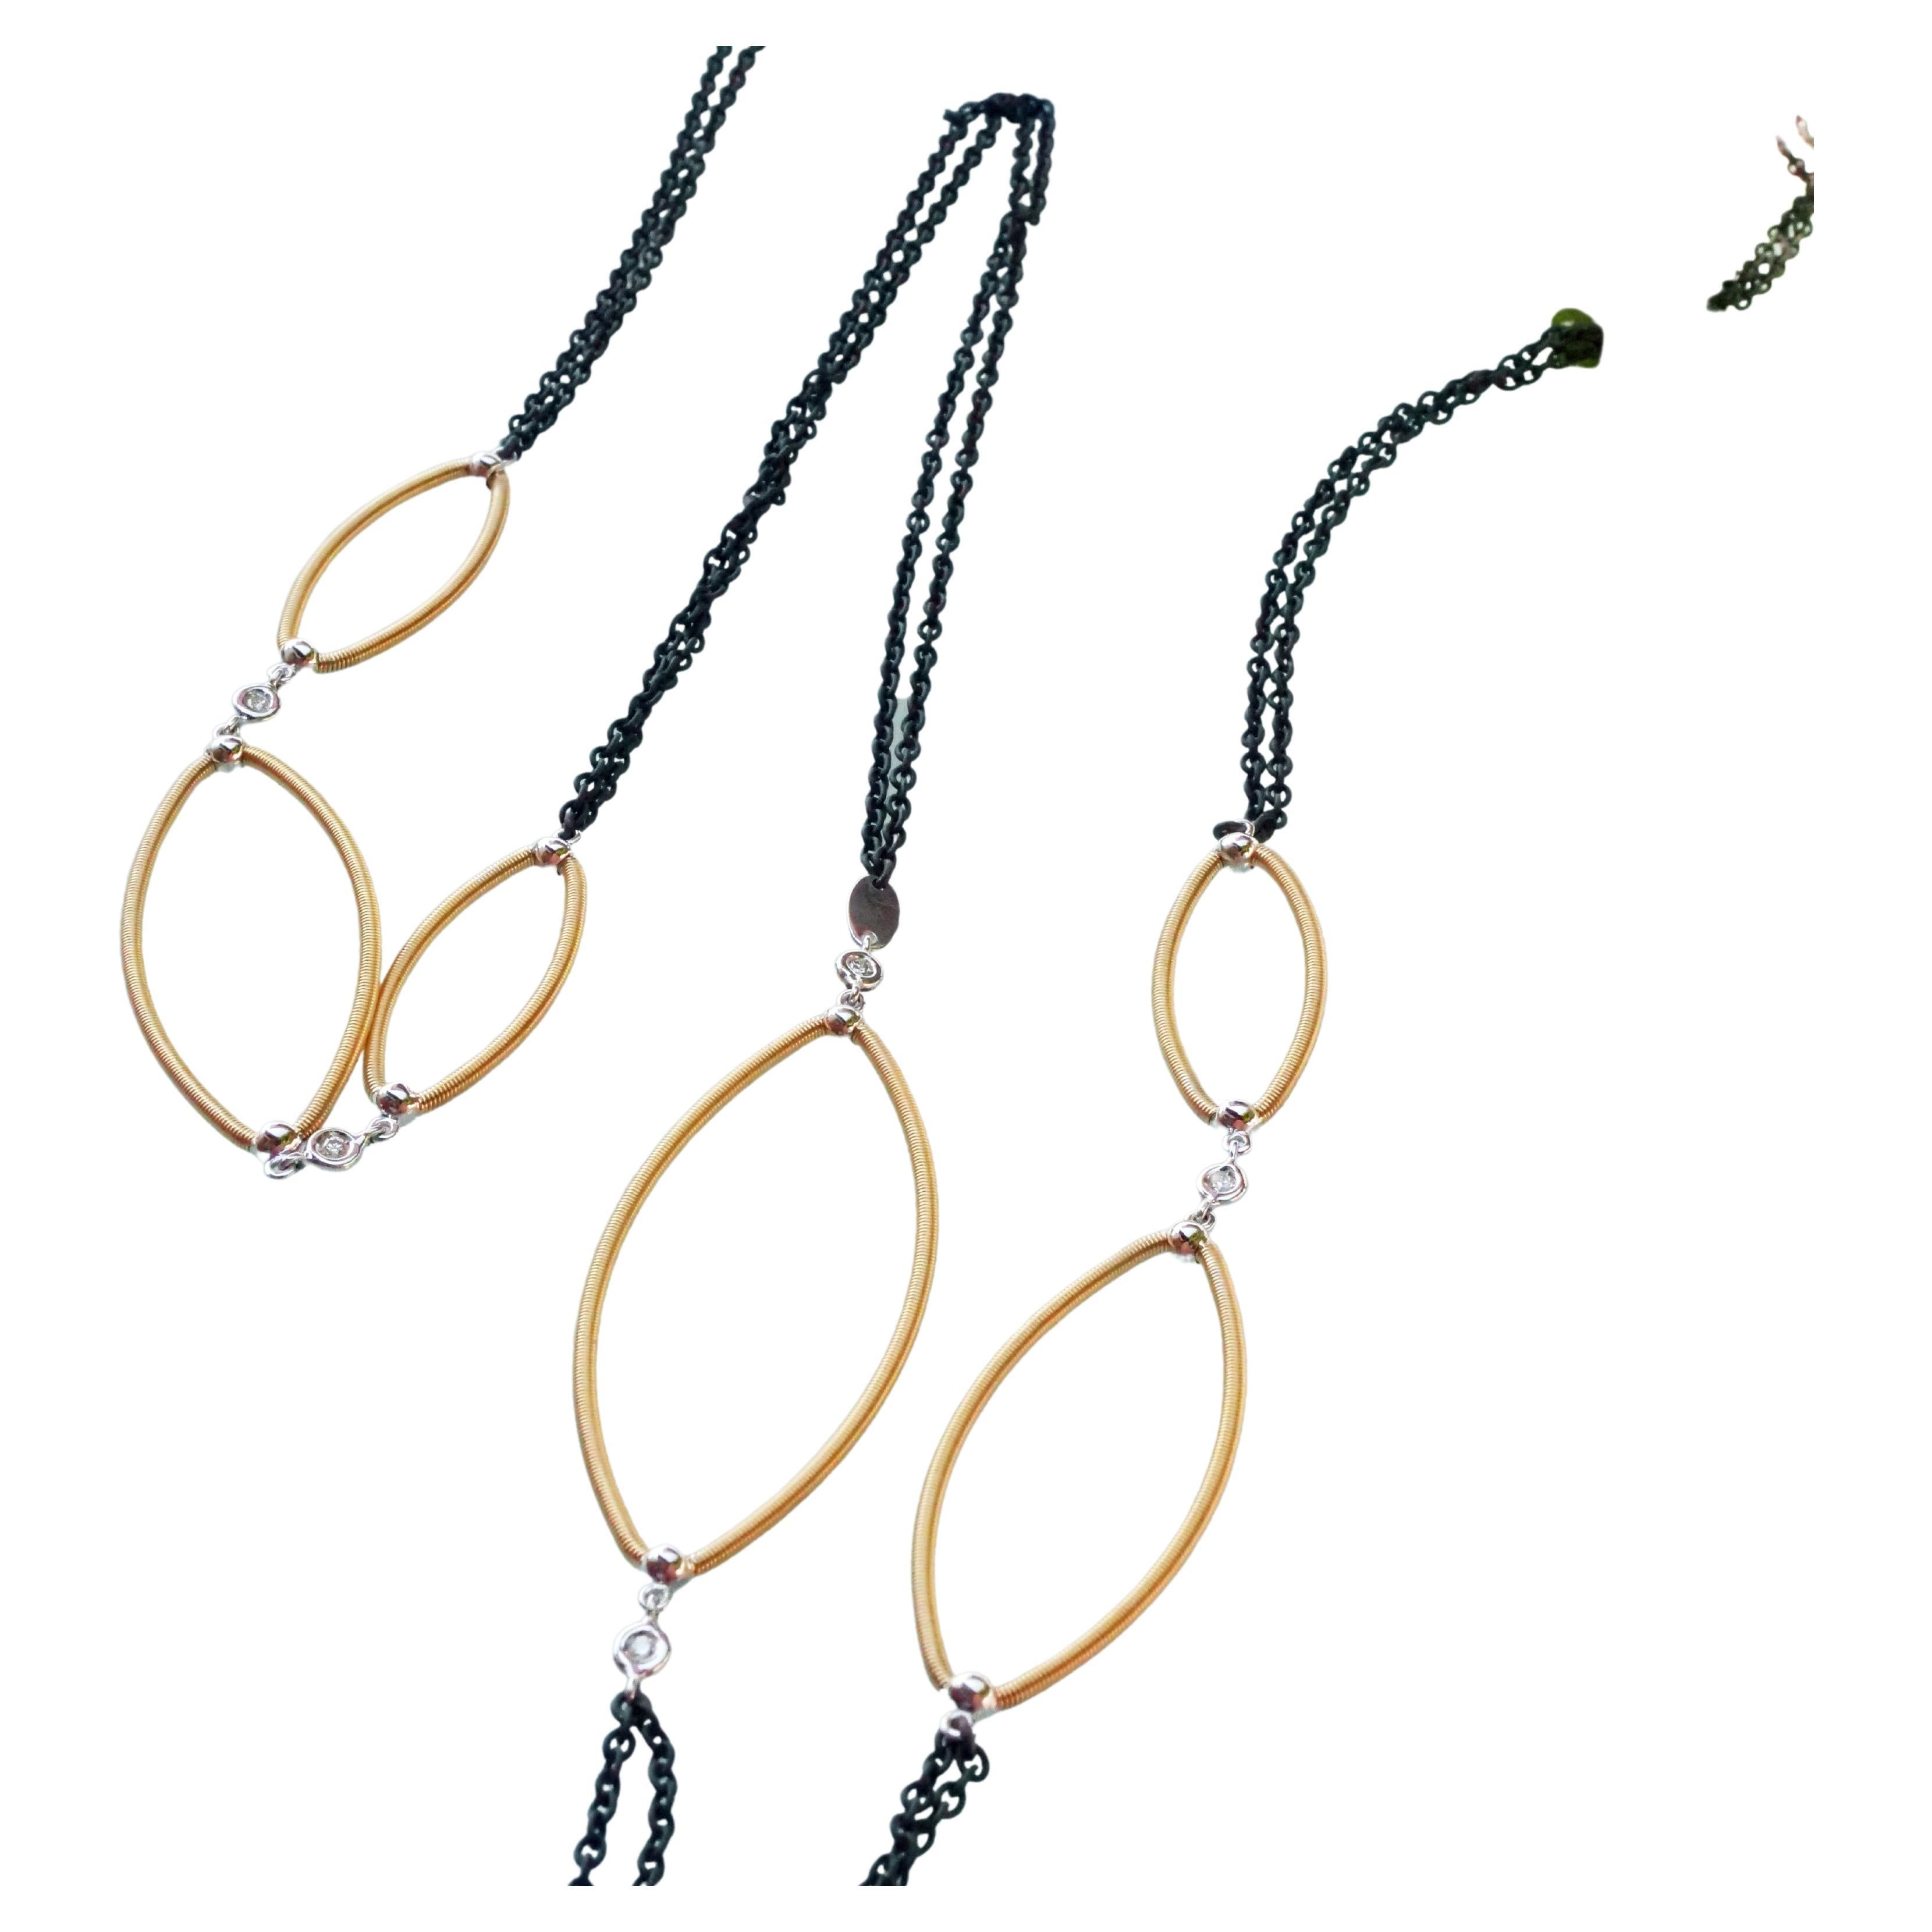 Präzion paired with craftsmanship, this beautiful necklace was designed by the fine gold wire wrapping around a flexible titanium spring by the company Silhouette Jewelery Bentner from Pforzheim in 750 yellow gold in conjunction with blackened iron,